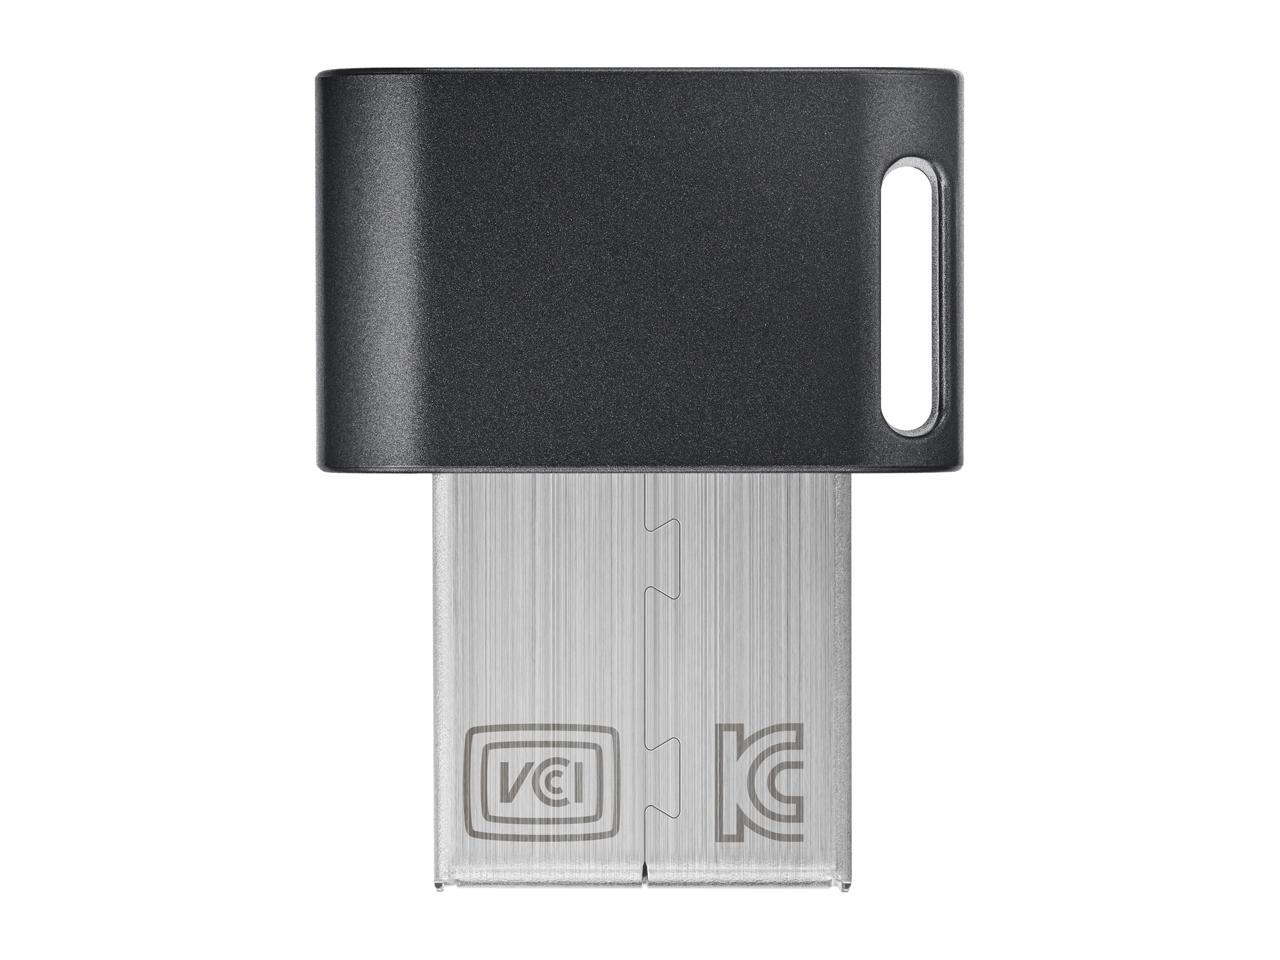 Samsung 128Gb Fit Plus Usb 3.1 Flash Drive, Speed Up To 300Mb/S (Muf-128Ab/Am)